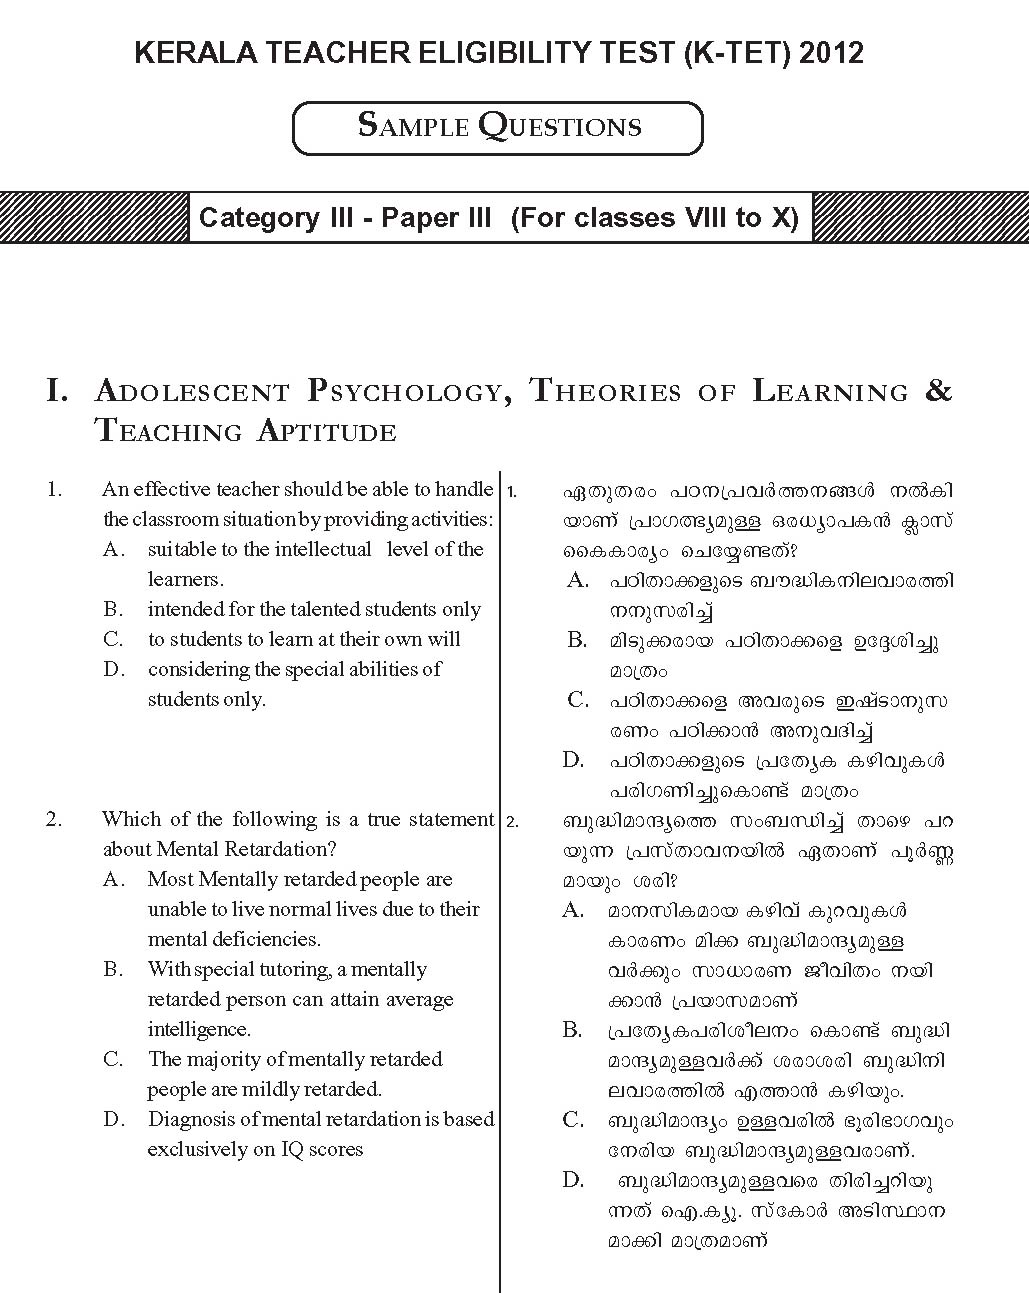 KTET Category III Paper III Adolescent Psychology Question Paper with Answers 2012 1